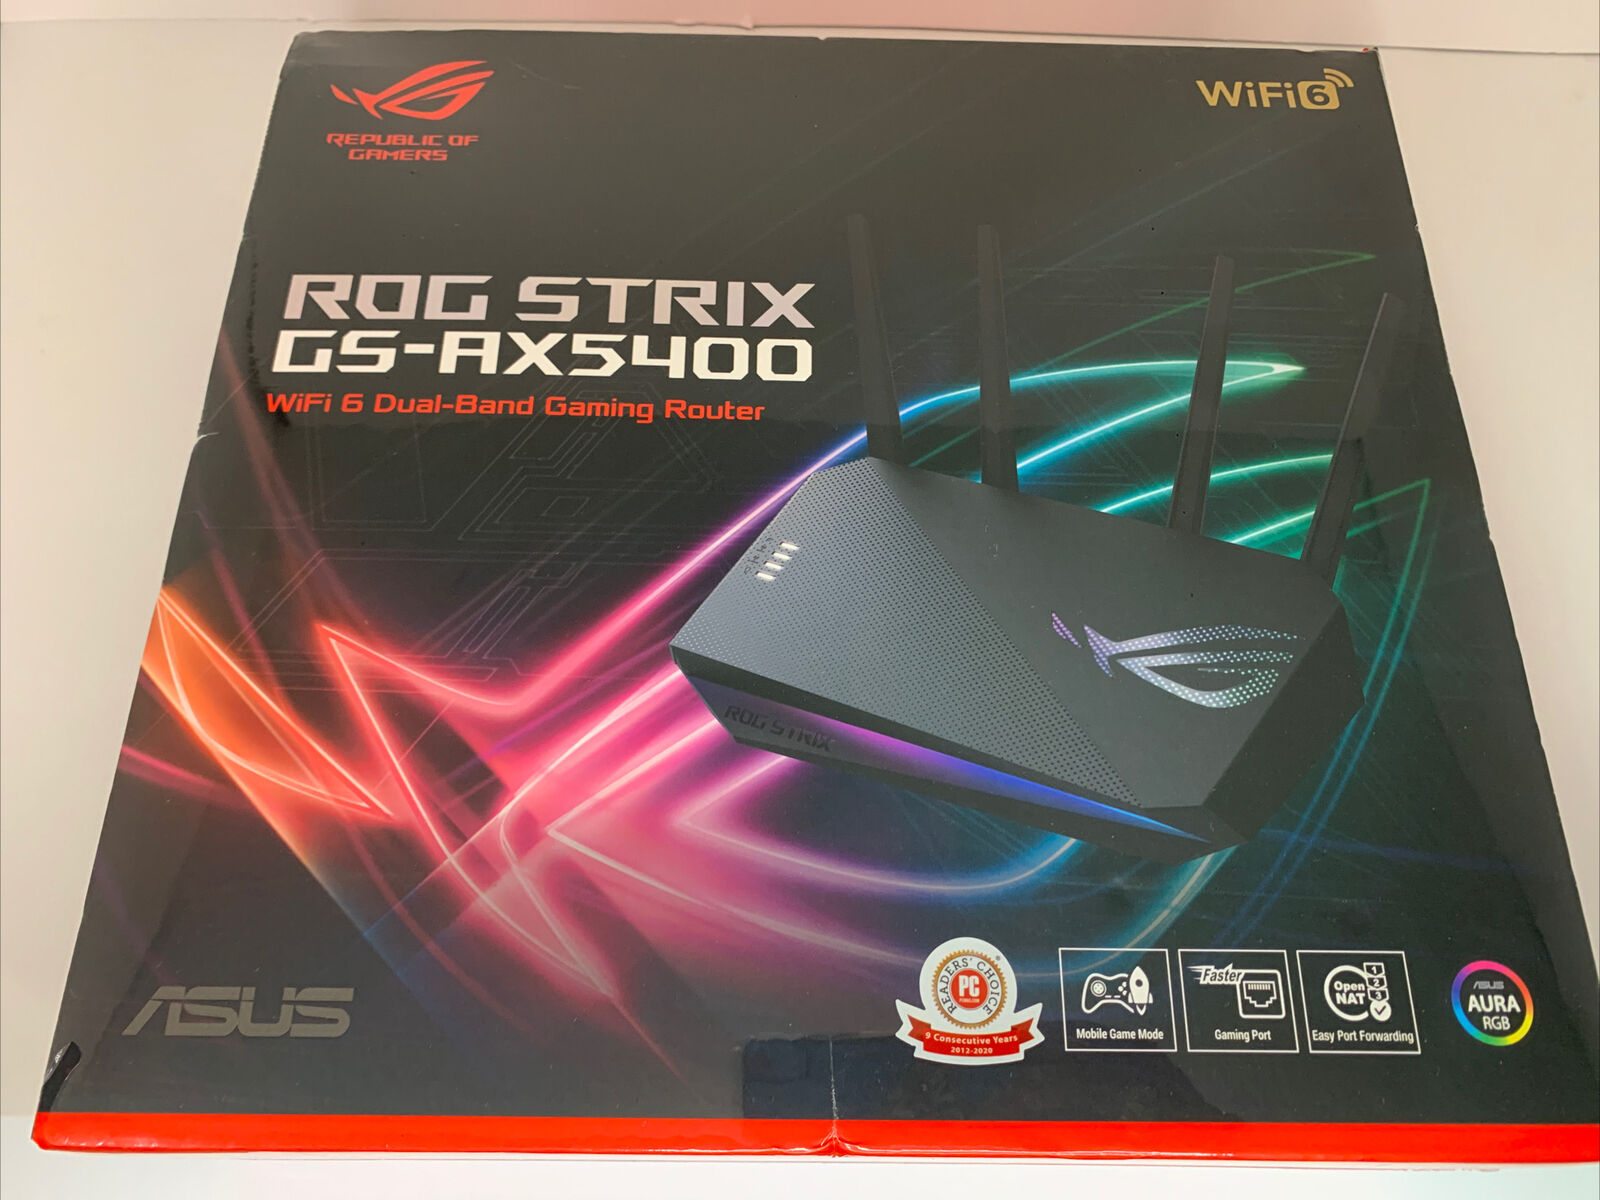 Asus ROG STRIX GS-AX5400 WiFi 6 Gaming Router New